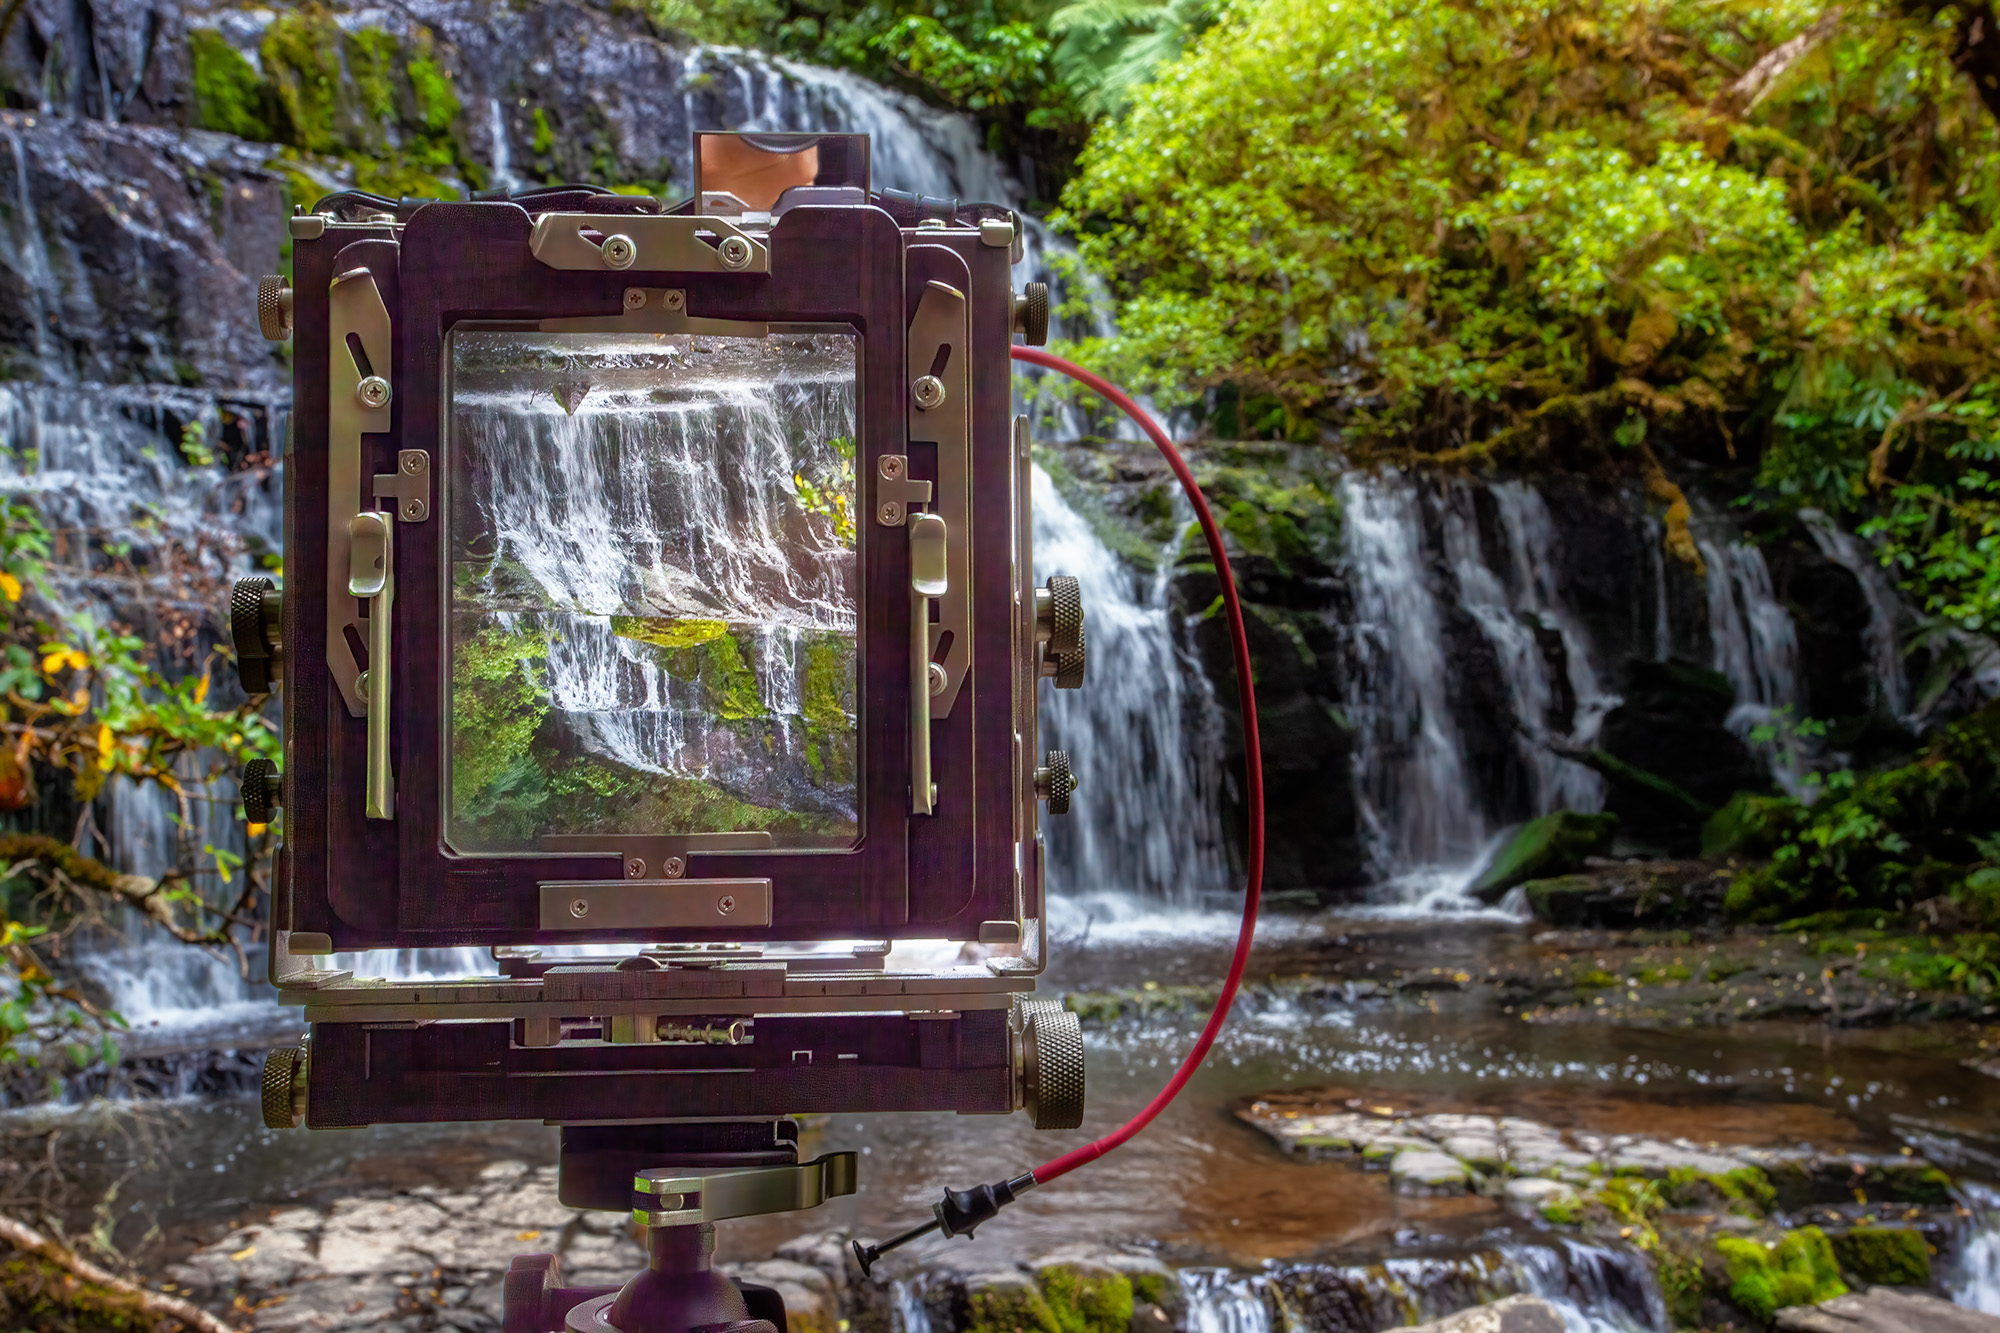 In this cherished image, my Ebony SV45Te Camera stands poised for action, ready to capture the magic of a waterfall. The photograph...